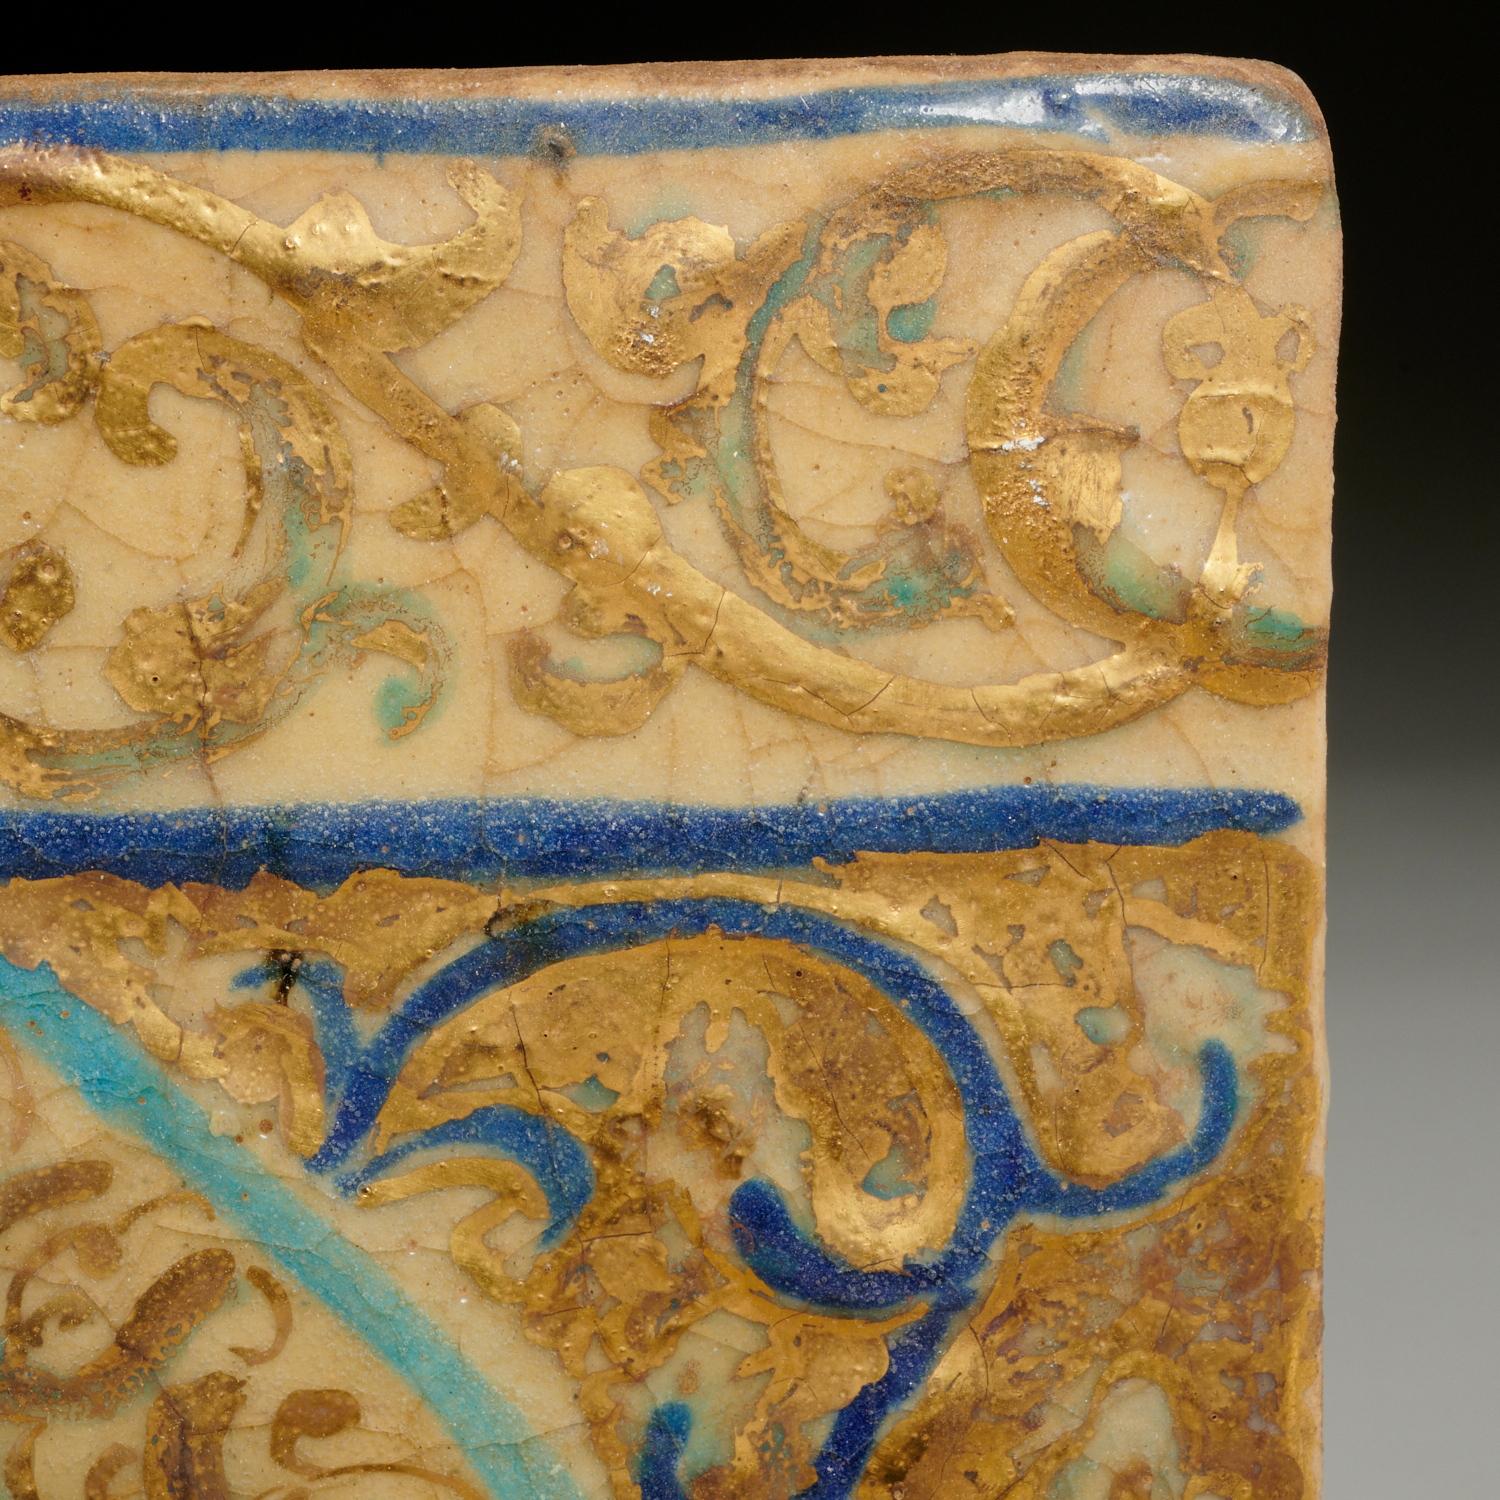 Fired Antique Cobalt Blue, Turquoise and Gold Luster Glazed Persian Palace Tile